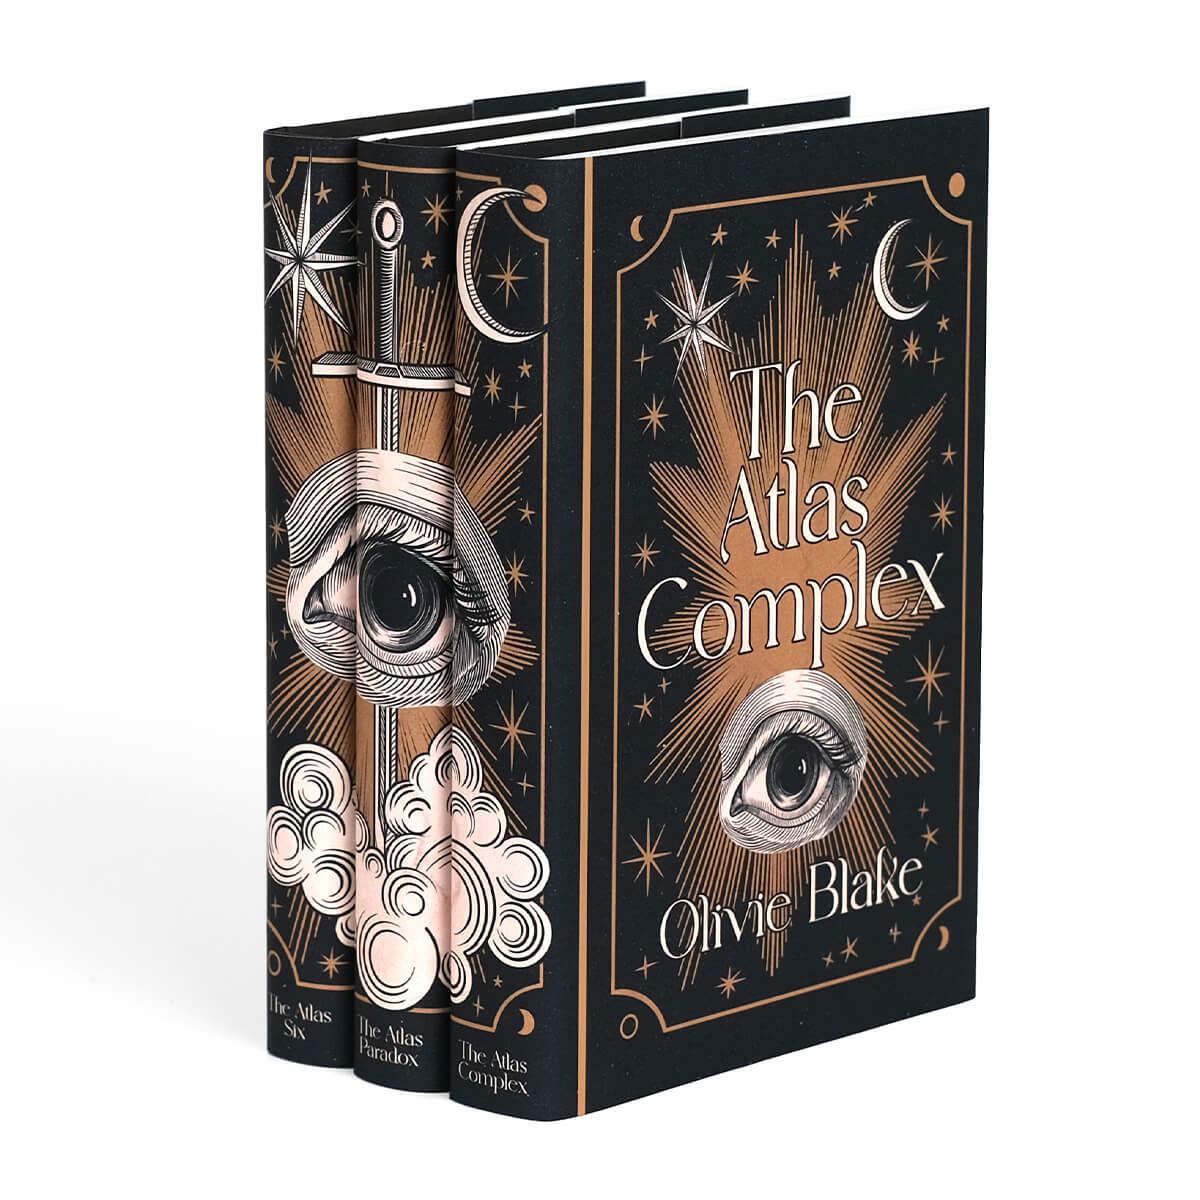 Angle shot of The Atlas Series by Olivia Blake. Front covers of jackets feature woodcut eye illustration between book title and author name surrounded by cooper colored stars and ornamental detailing.